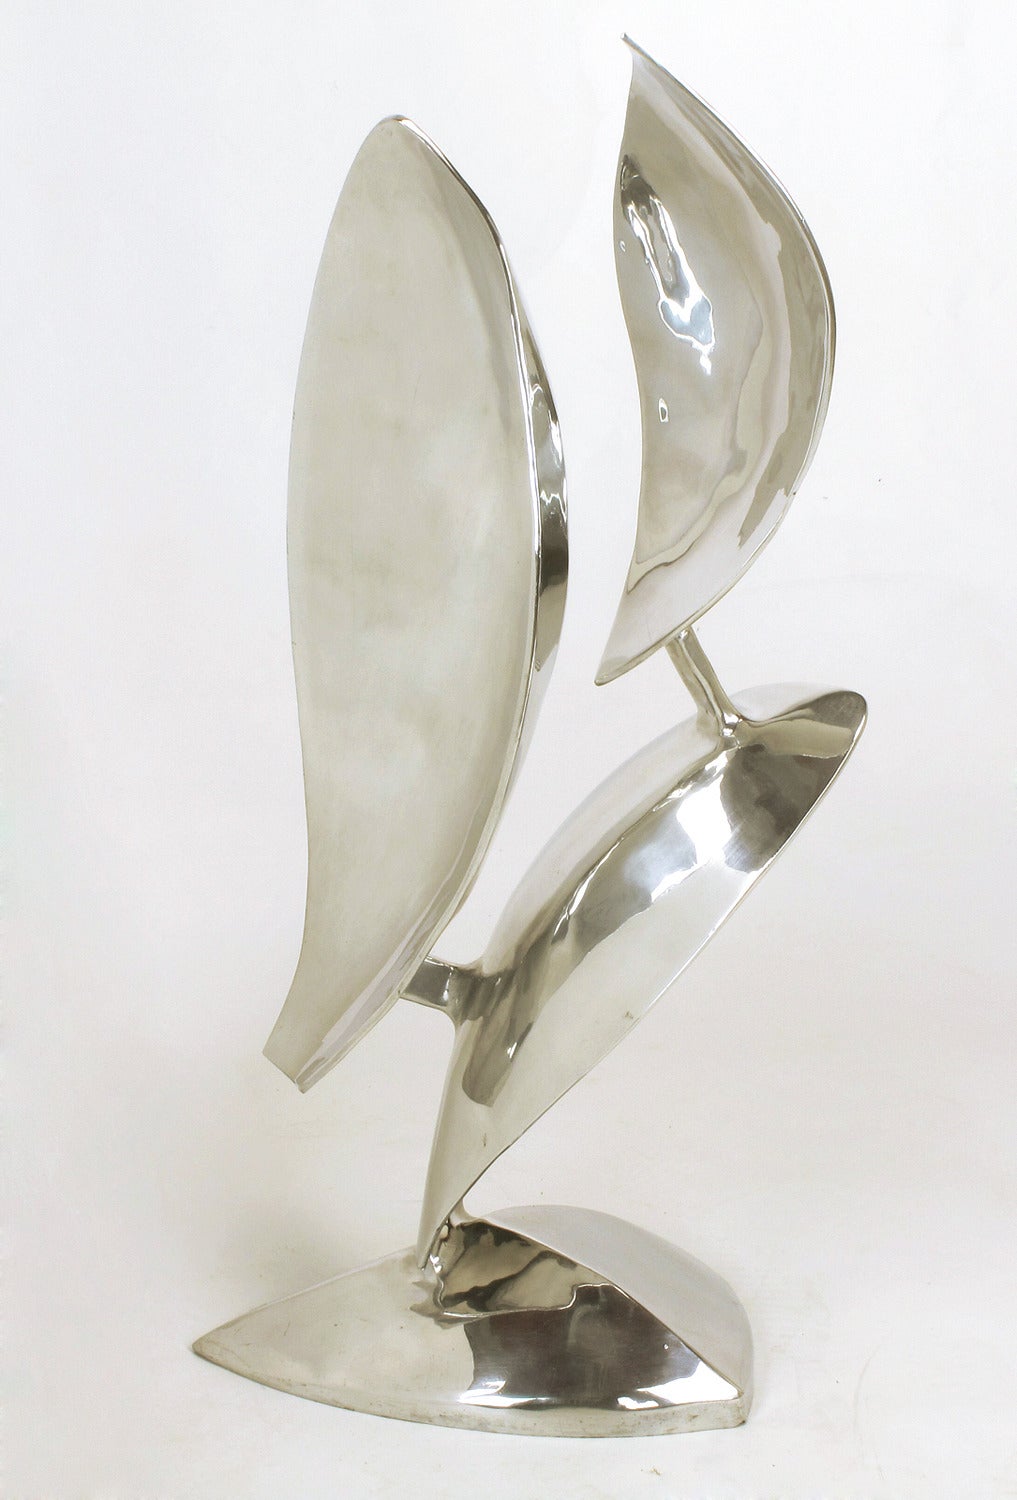 Polished aluminum sculpture of three organic shapes, possibly leaves or flower petals, mounted on a pyramidal base. Signed and dated 1977. Measures: 36